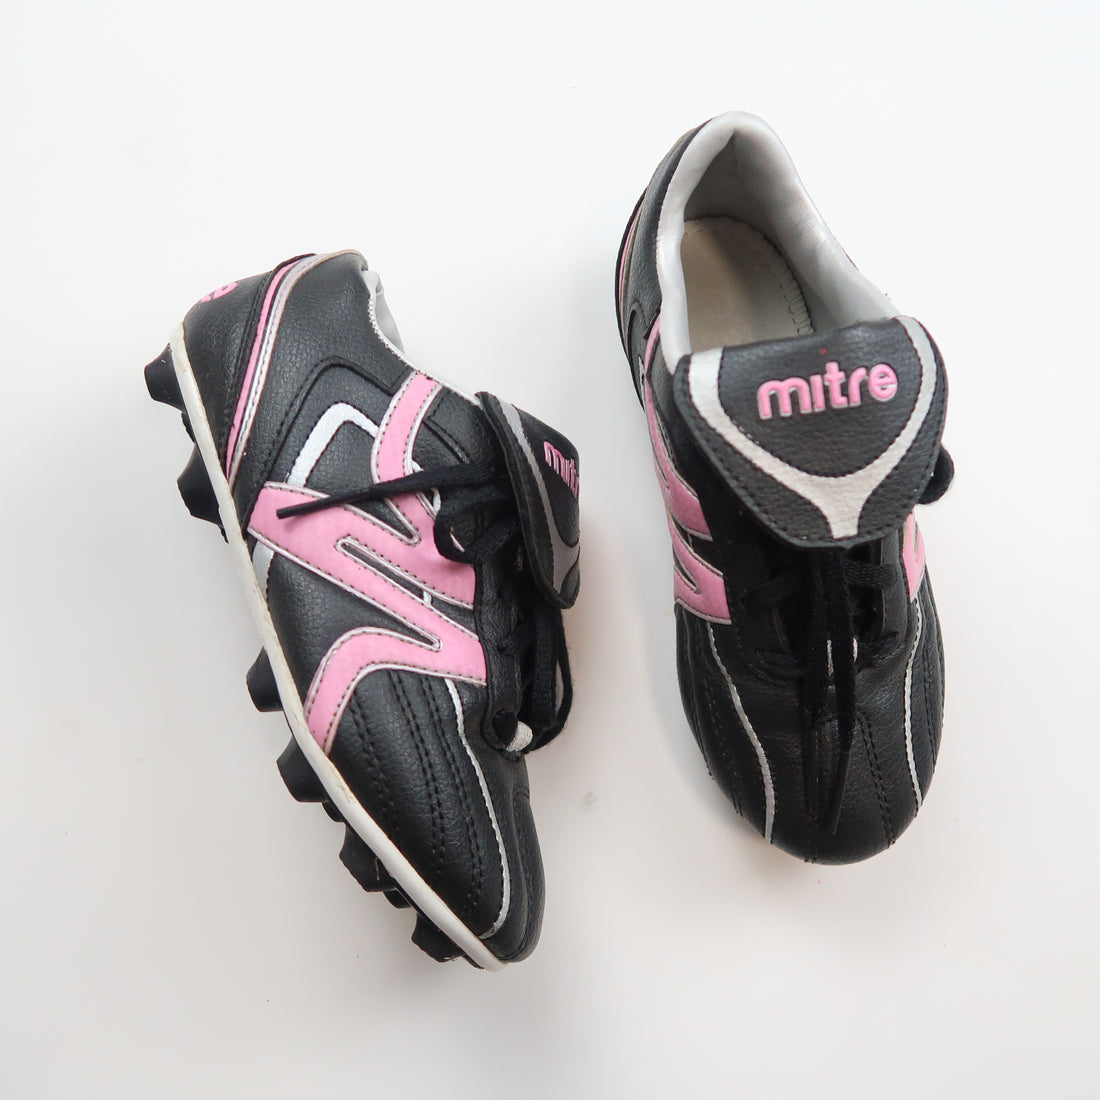 Mitre - Cleats (Shoes - Youth 1)